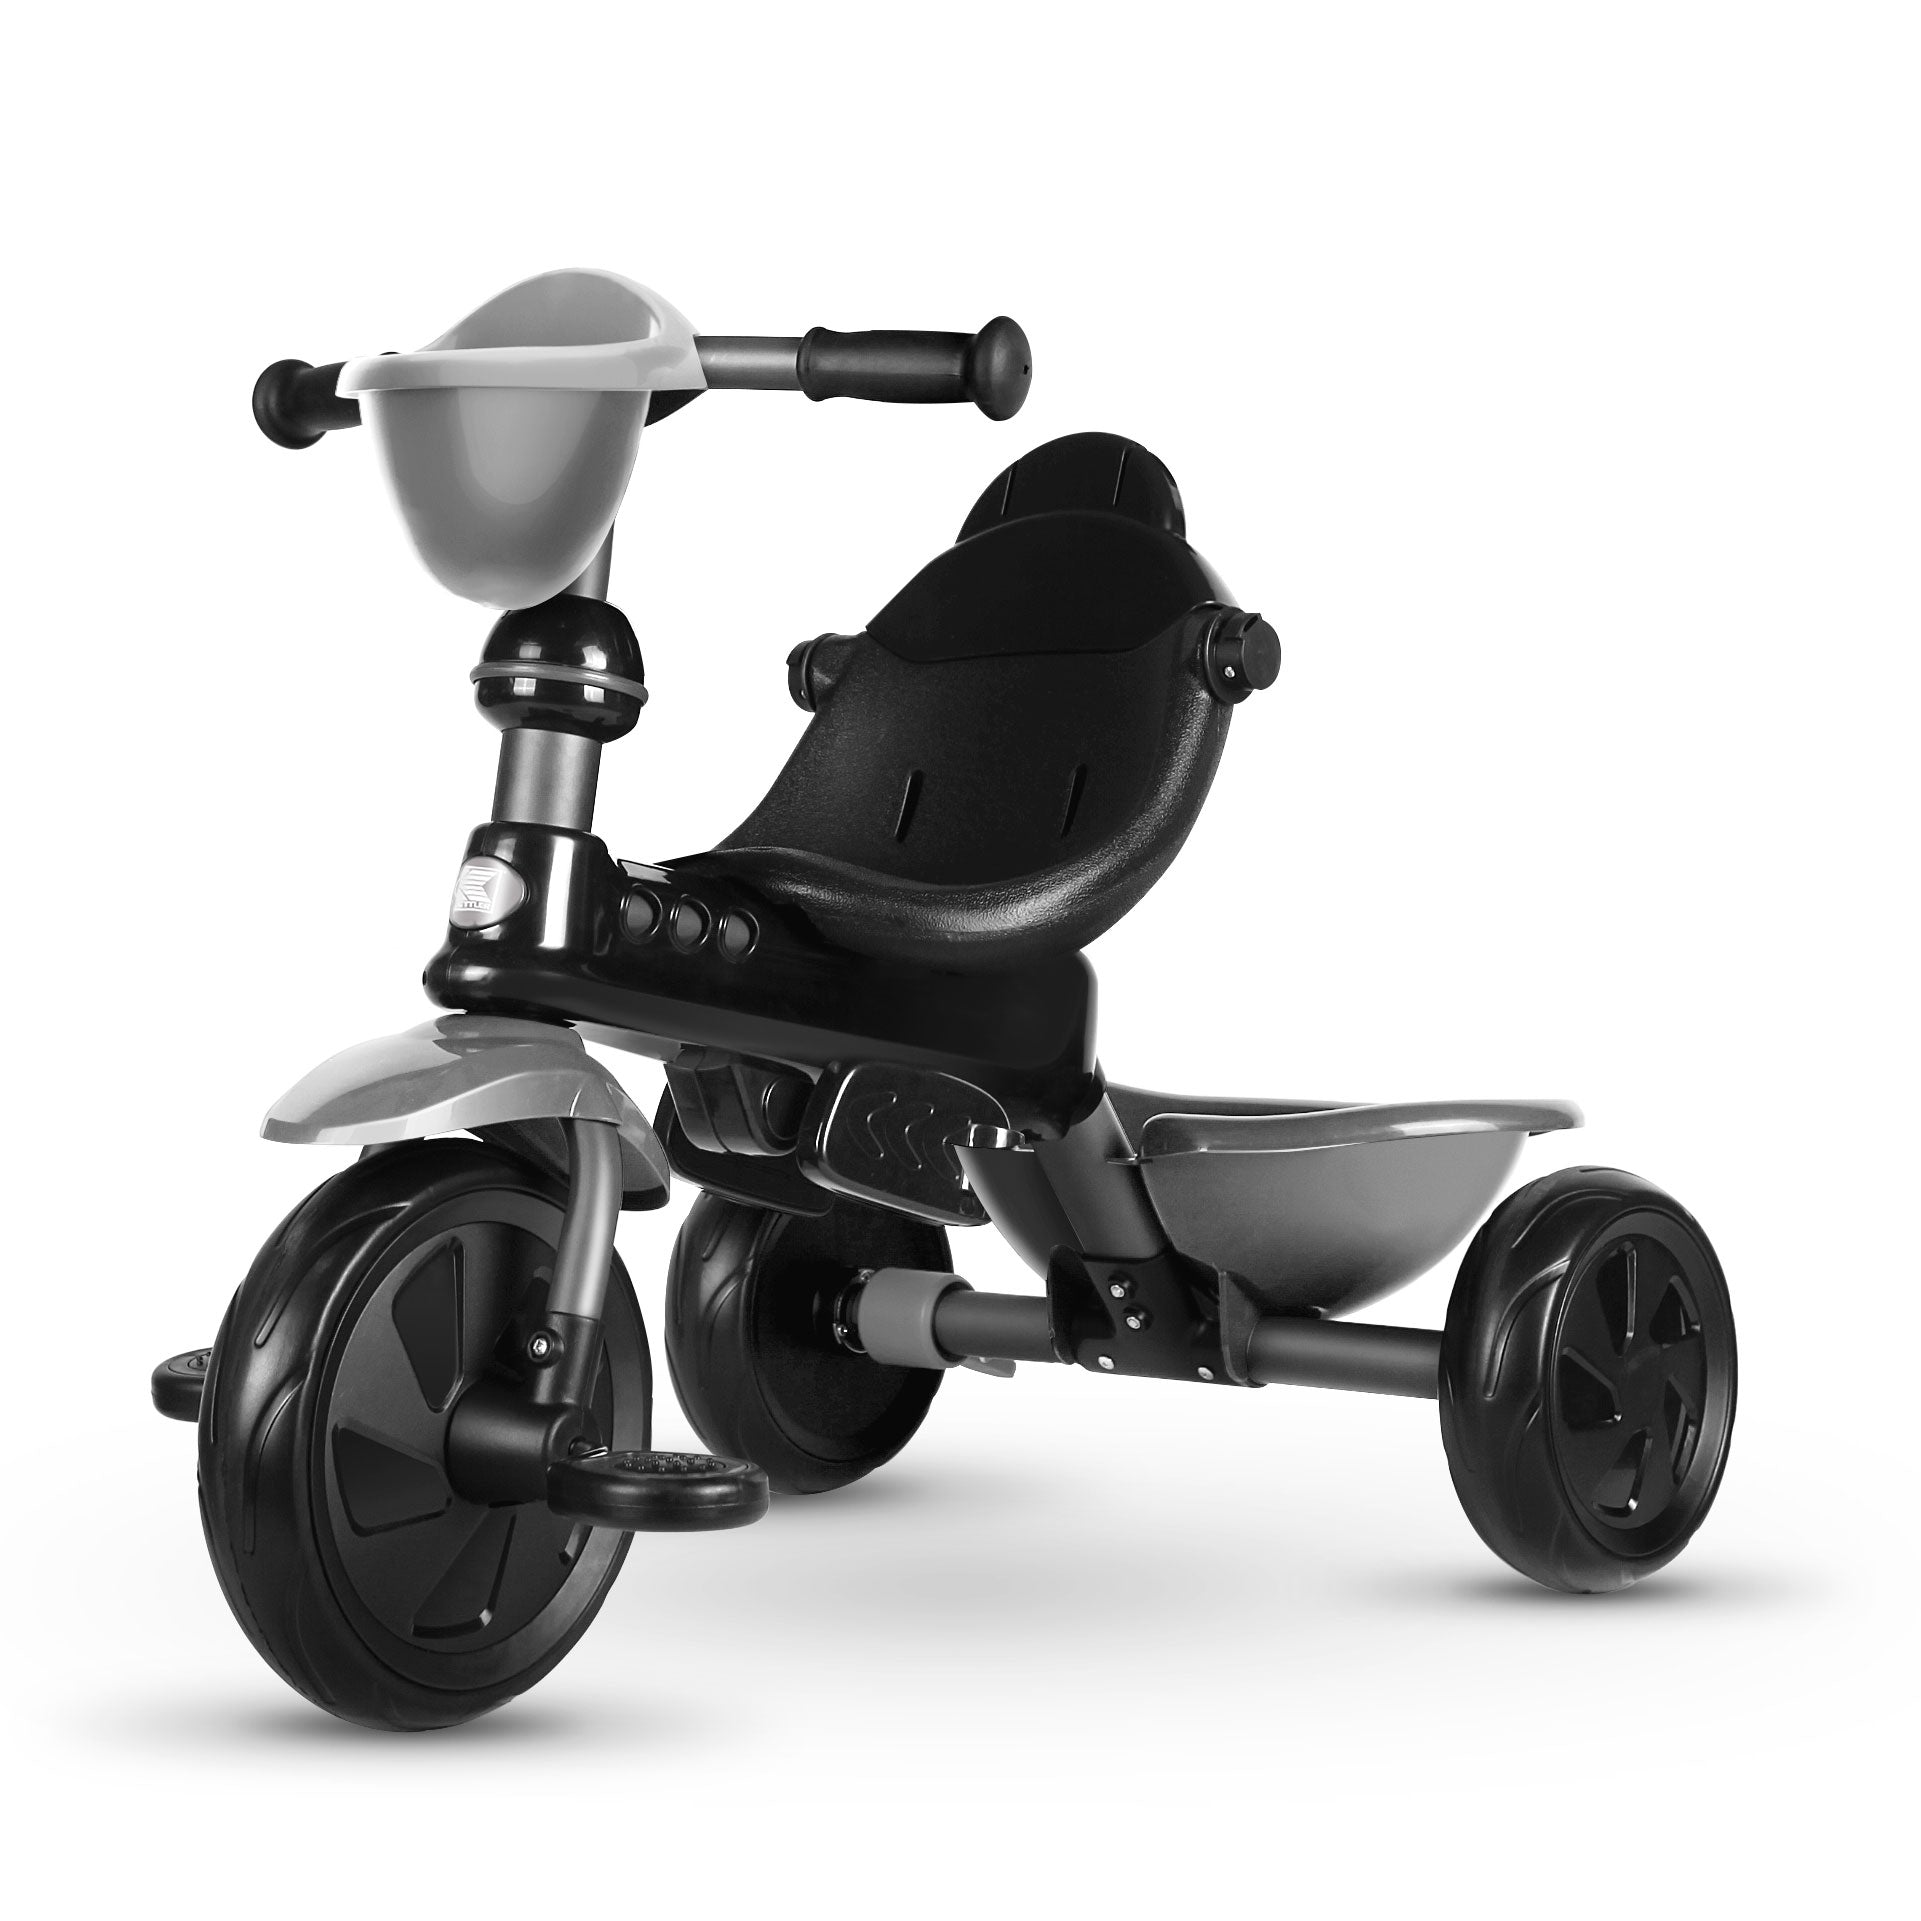 The KETTLER Happy Navigator 4-in-1 Trike grows with your little one from 10 to 72 months, transforming from parent-controlled ride on to kids’ tricycle. Unique removable and adjustable features make sure your little one has a trike for every stage of their development.